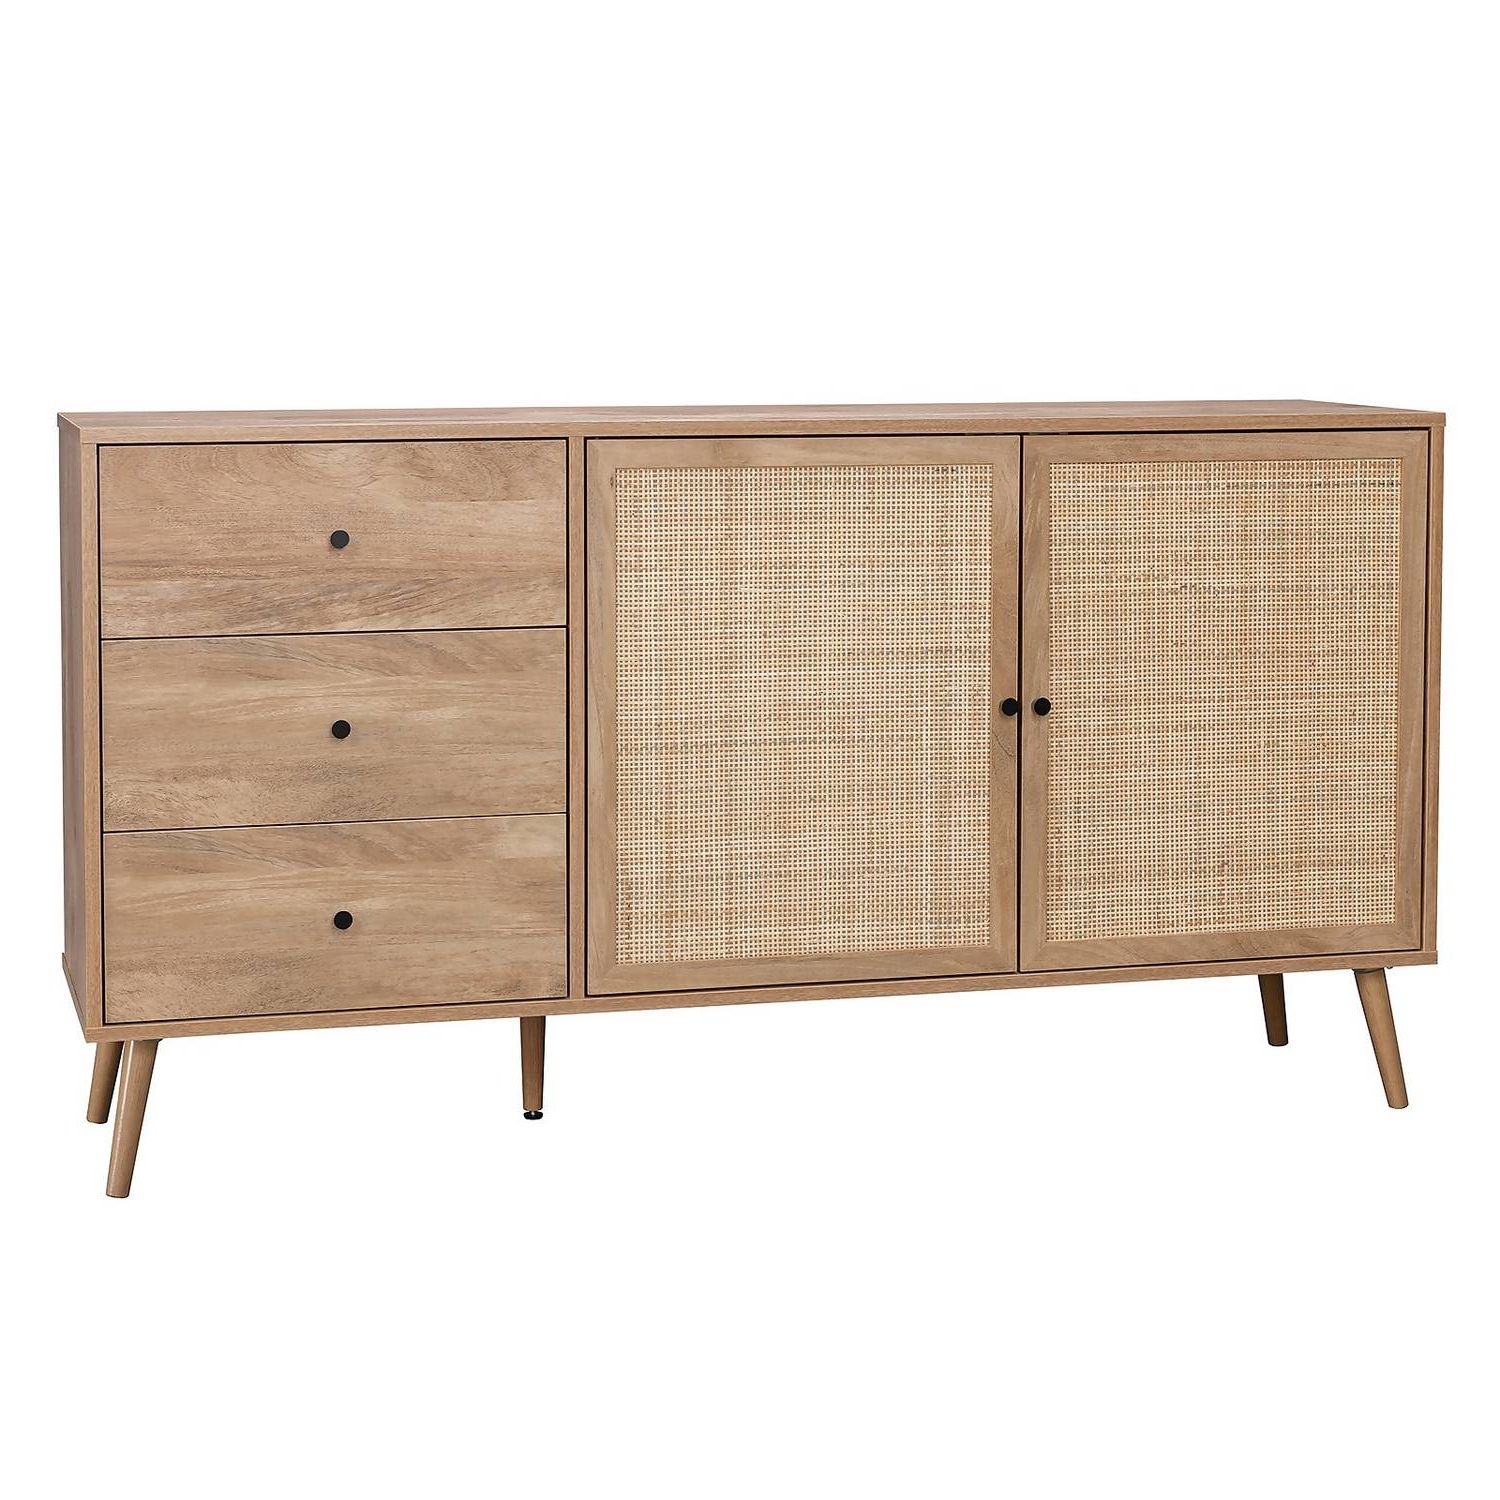 Kubu Rattan Large Sideboard | Homebase For Assembled Rattan Sideboards (Gallery 16 of 20)